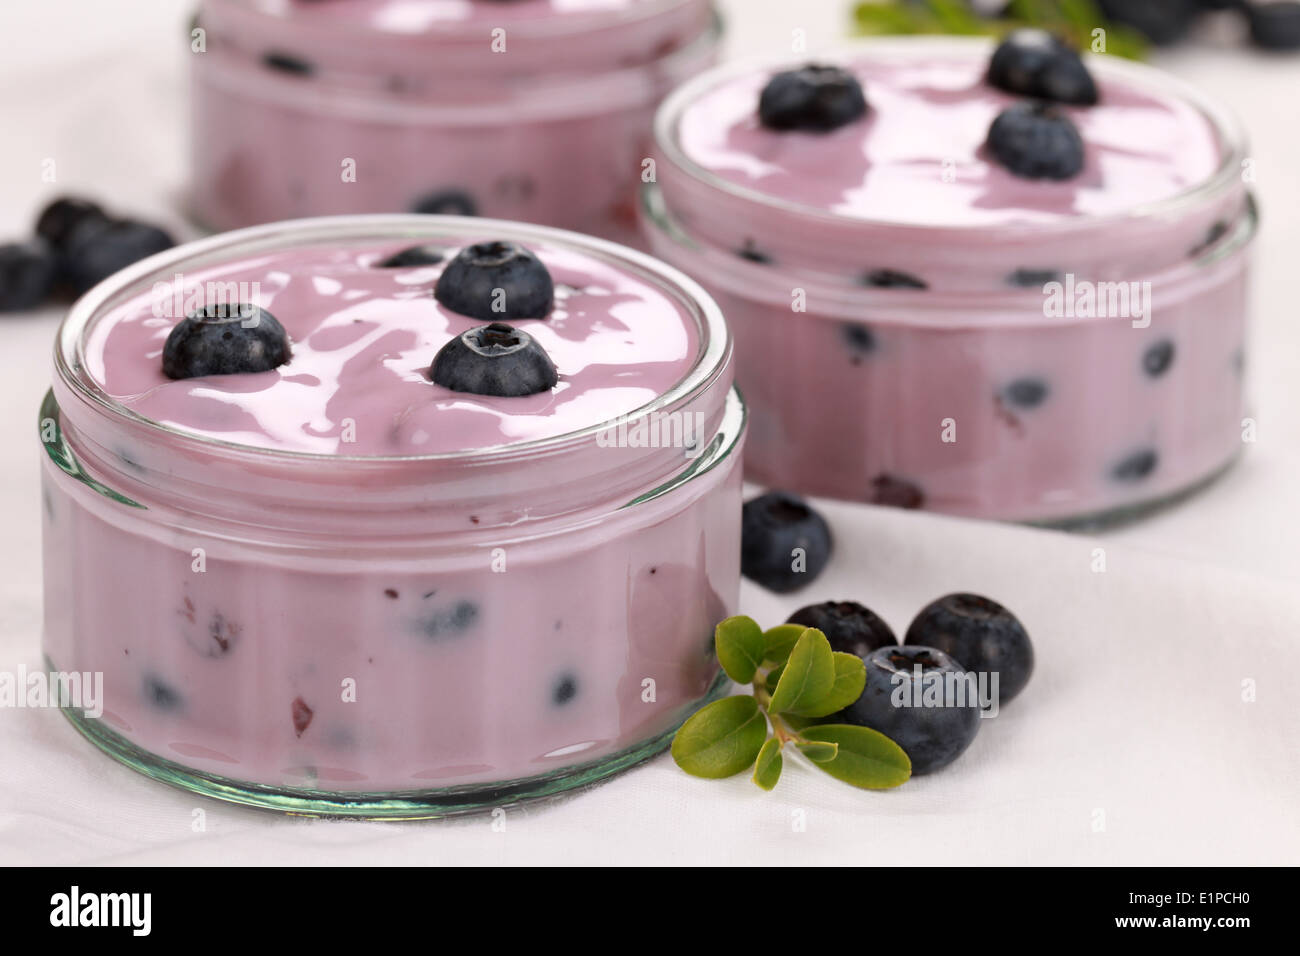 Blueberry yogurt in glass bowls served with fresh blueberries and decorated with leaves Stock Photo